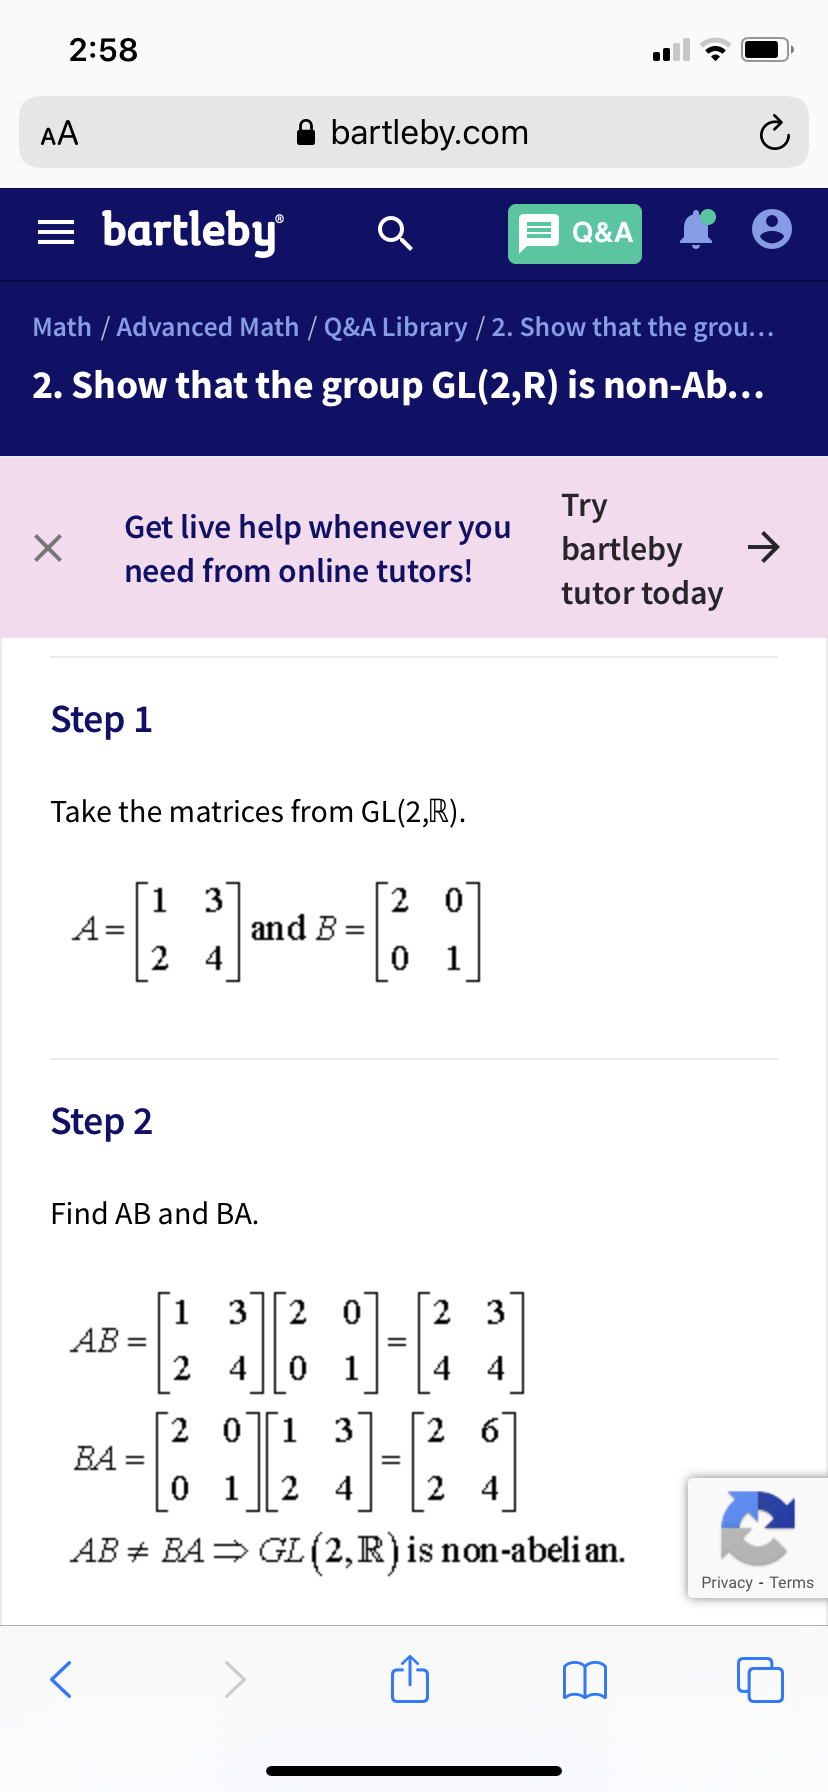 Step 1
Take the matrices from GL(2,R).
1 3
A =
2 4
and B:
0 1
